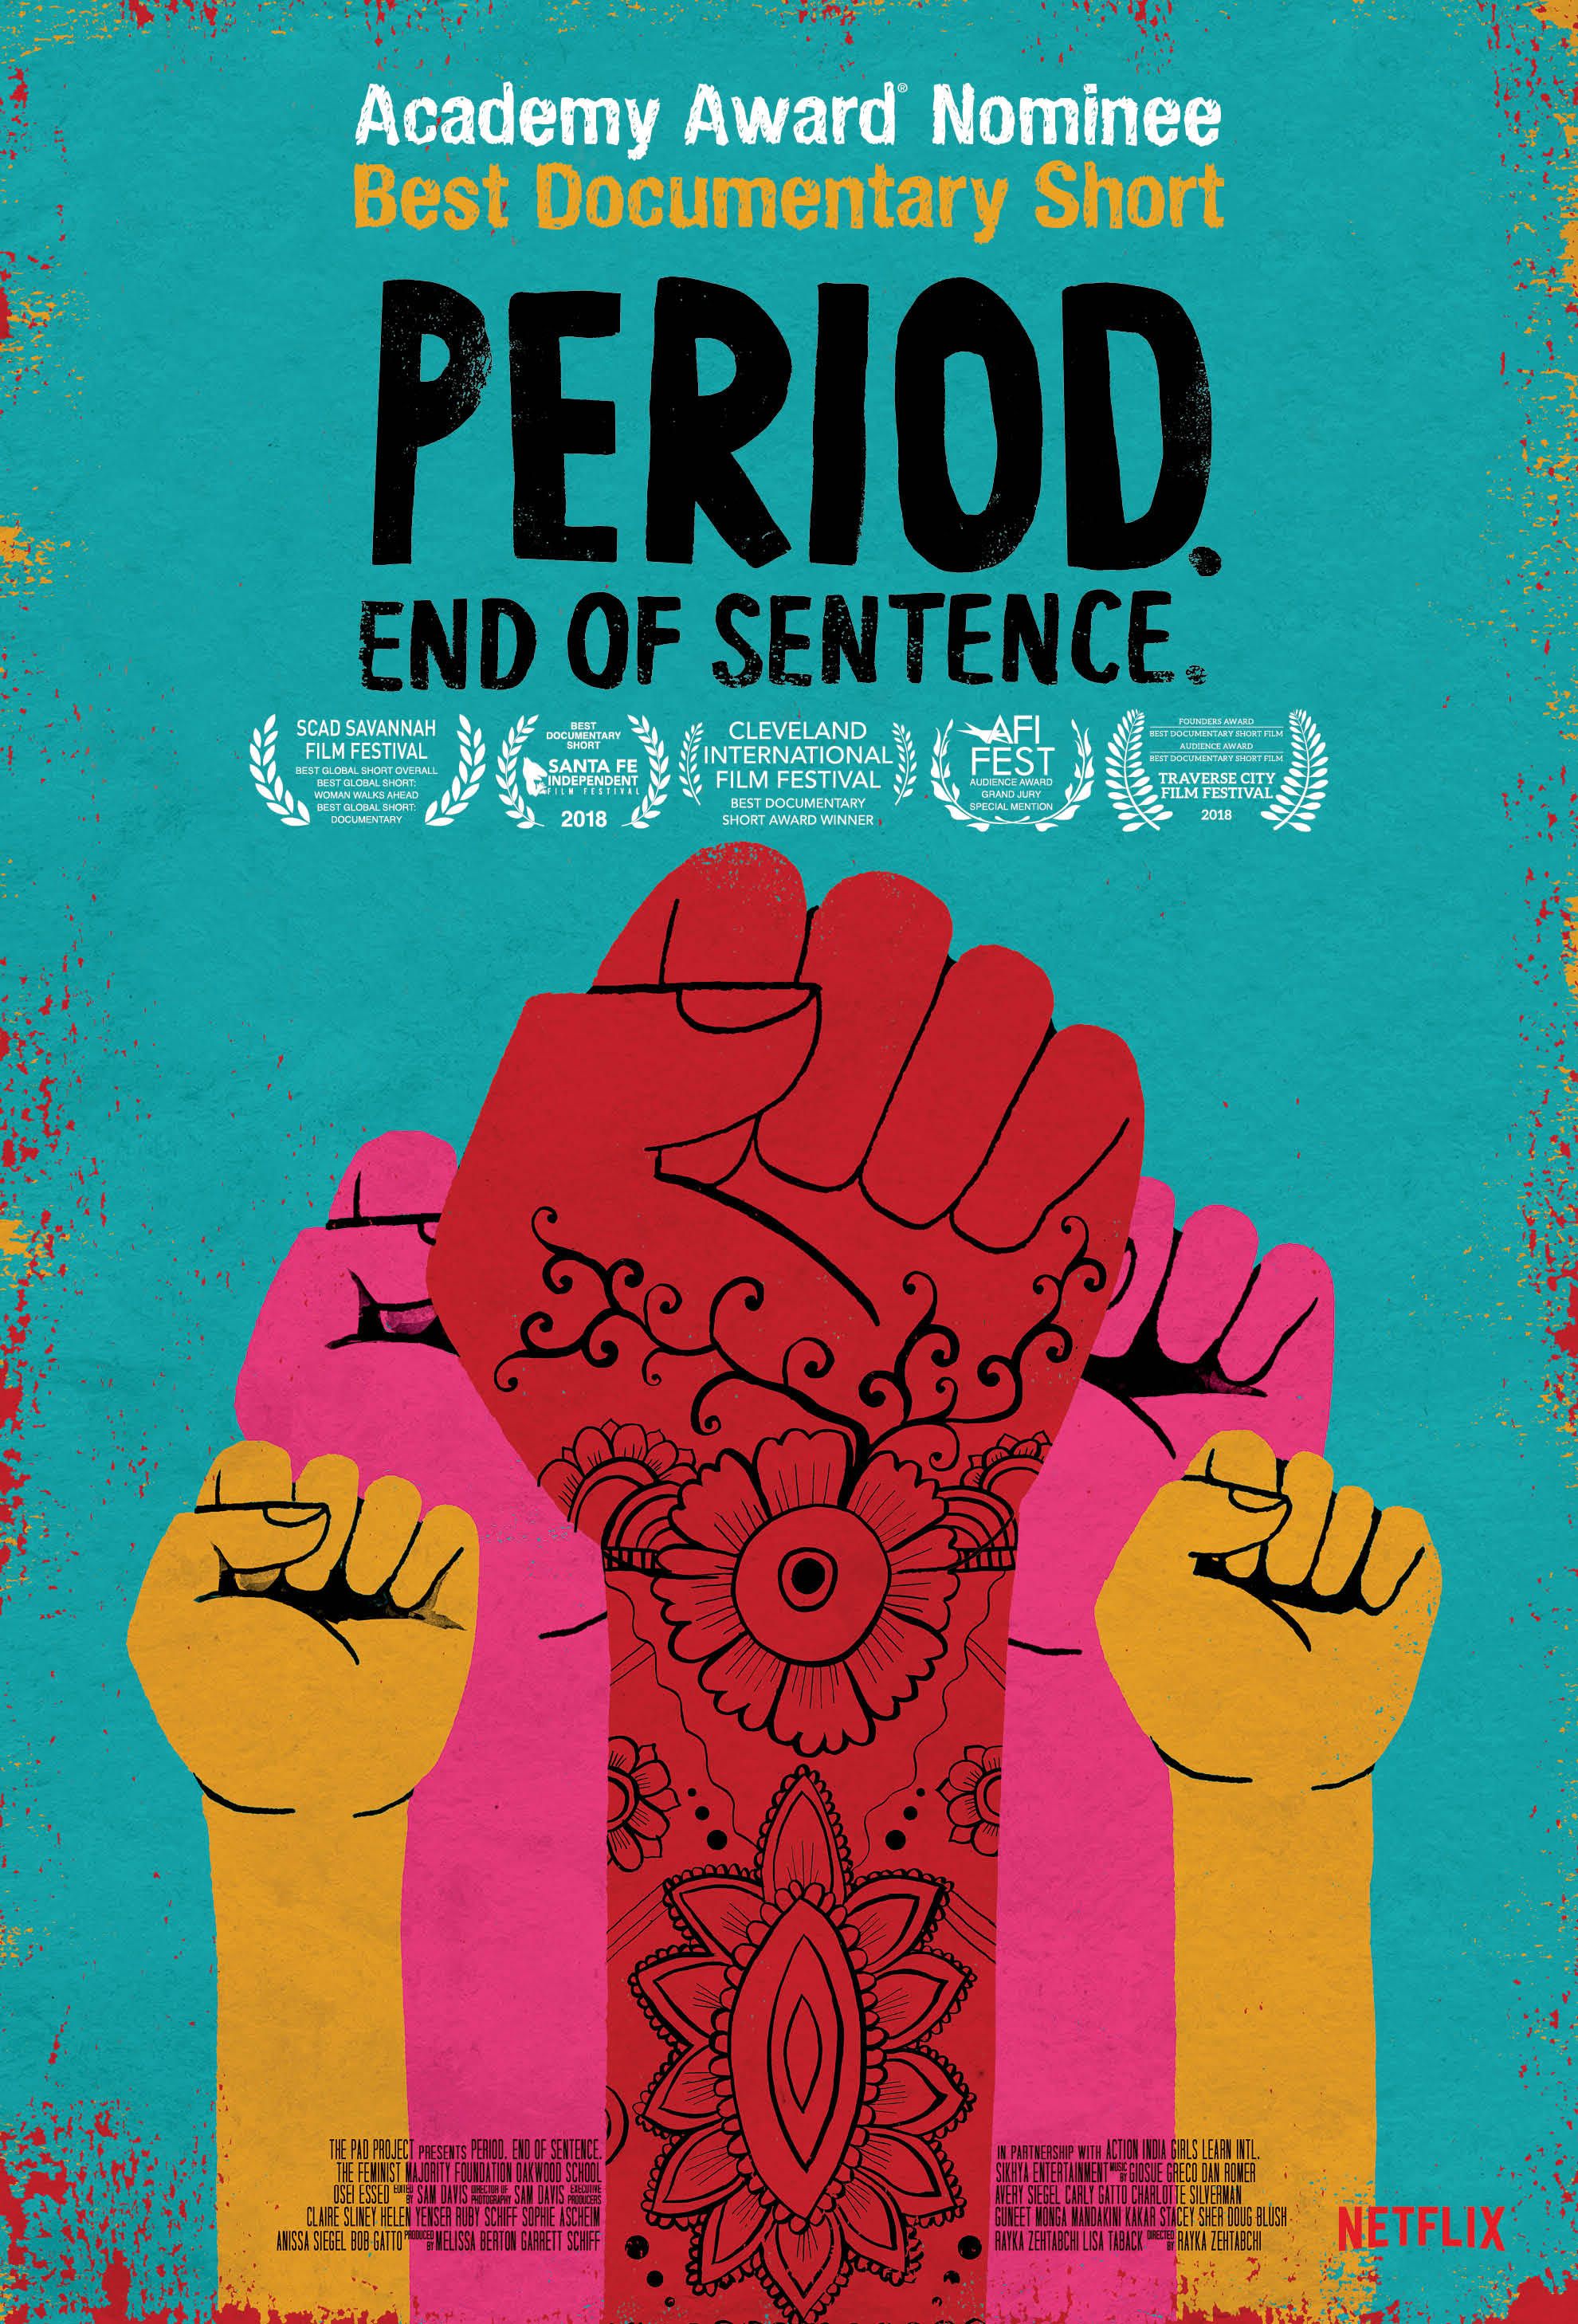 Period. End of Sentence, promotional poster